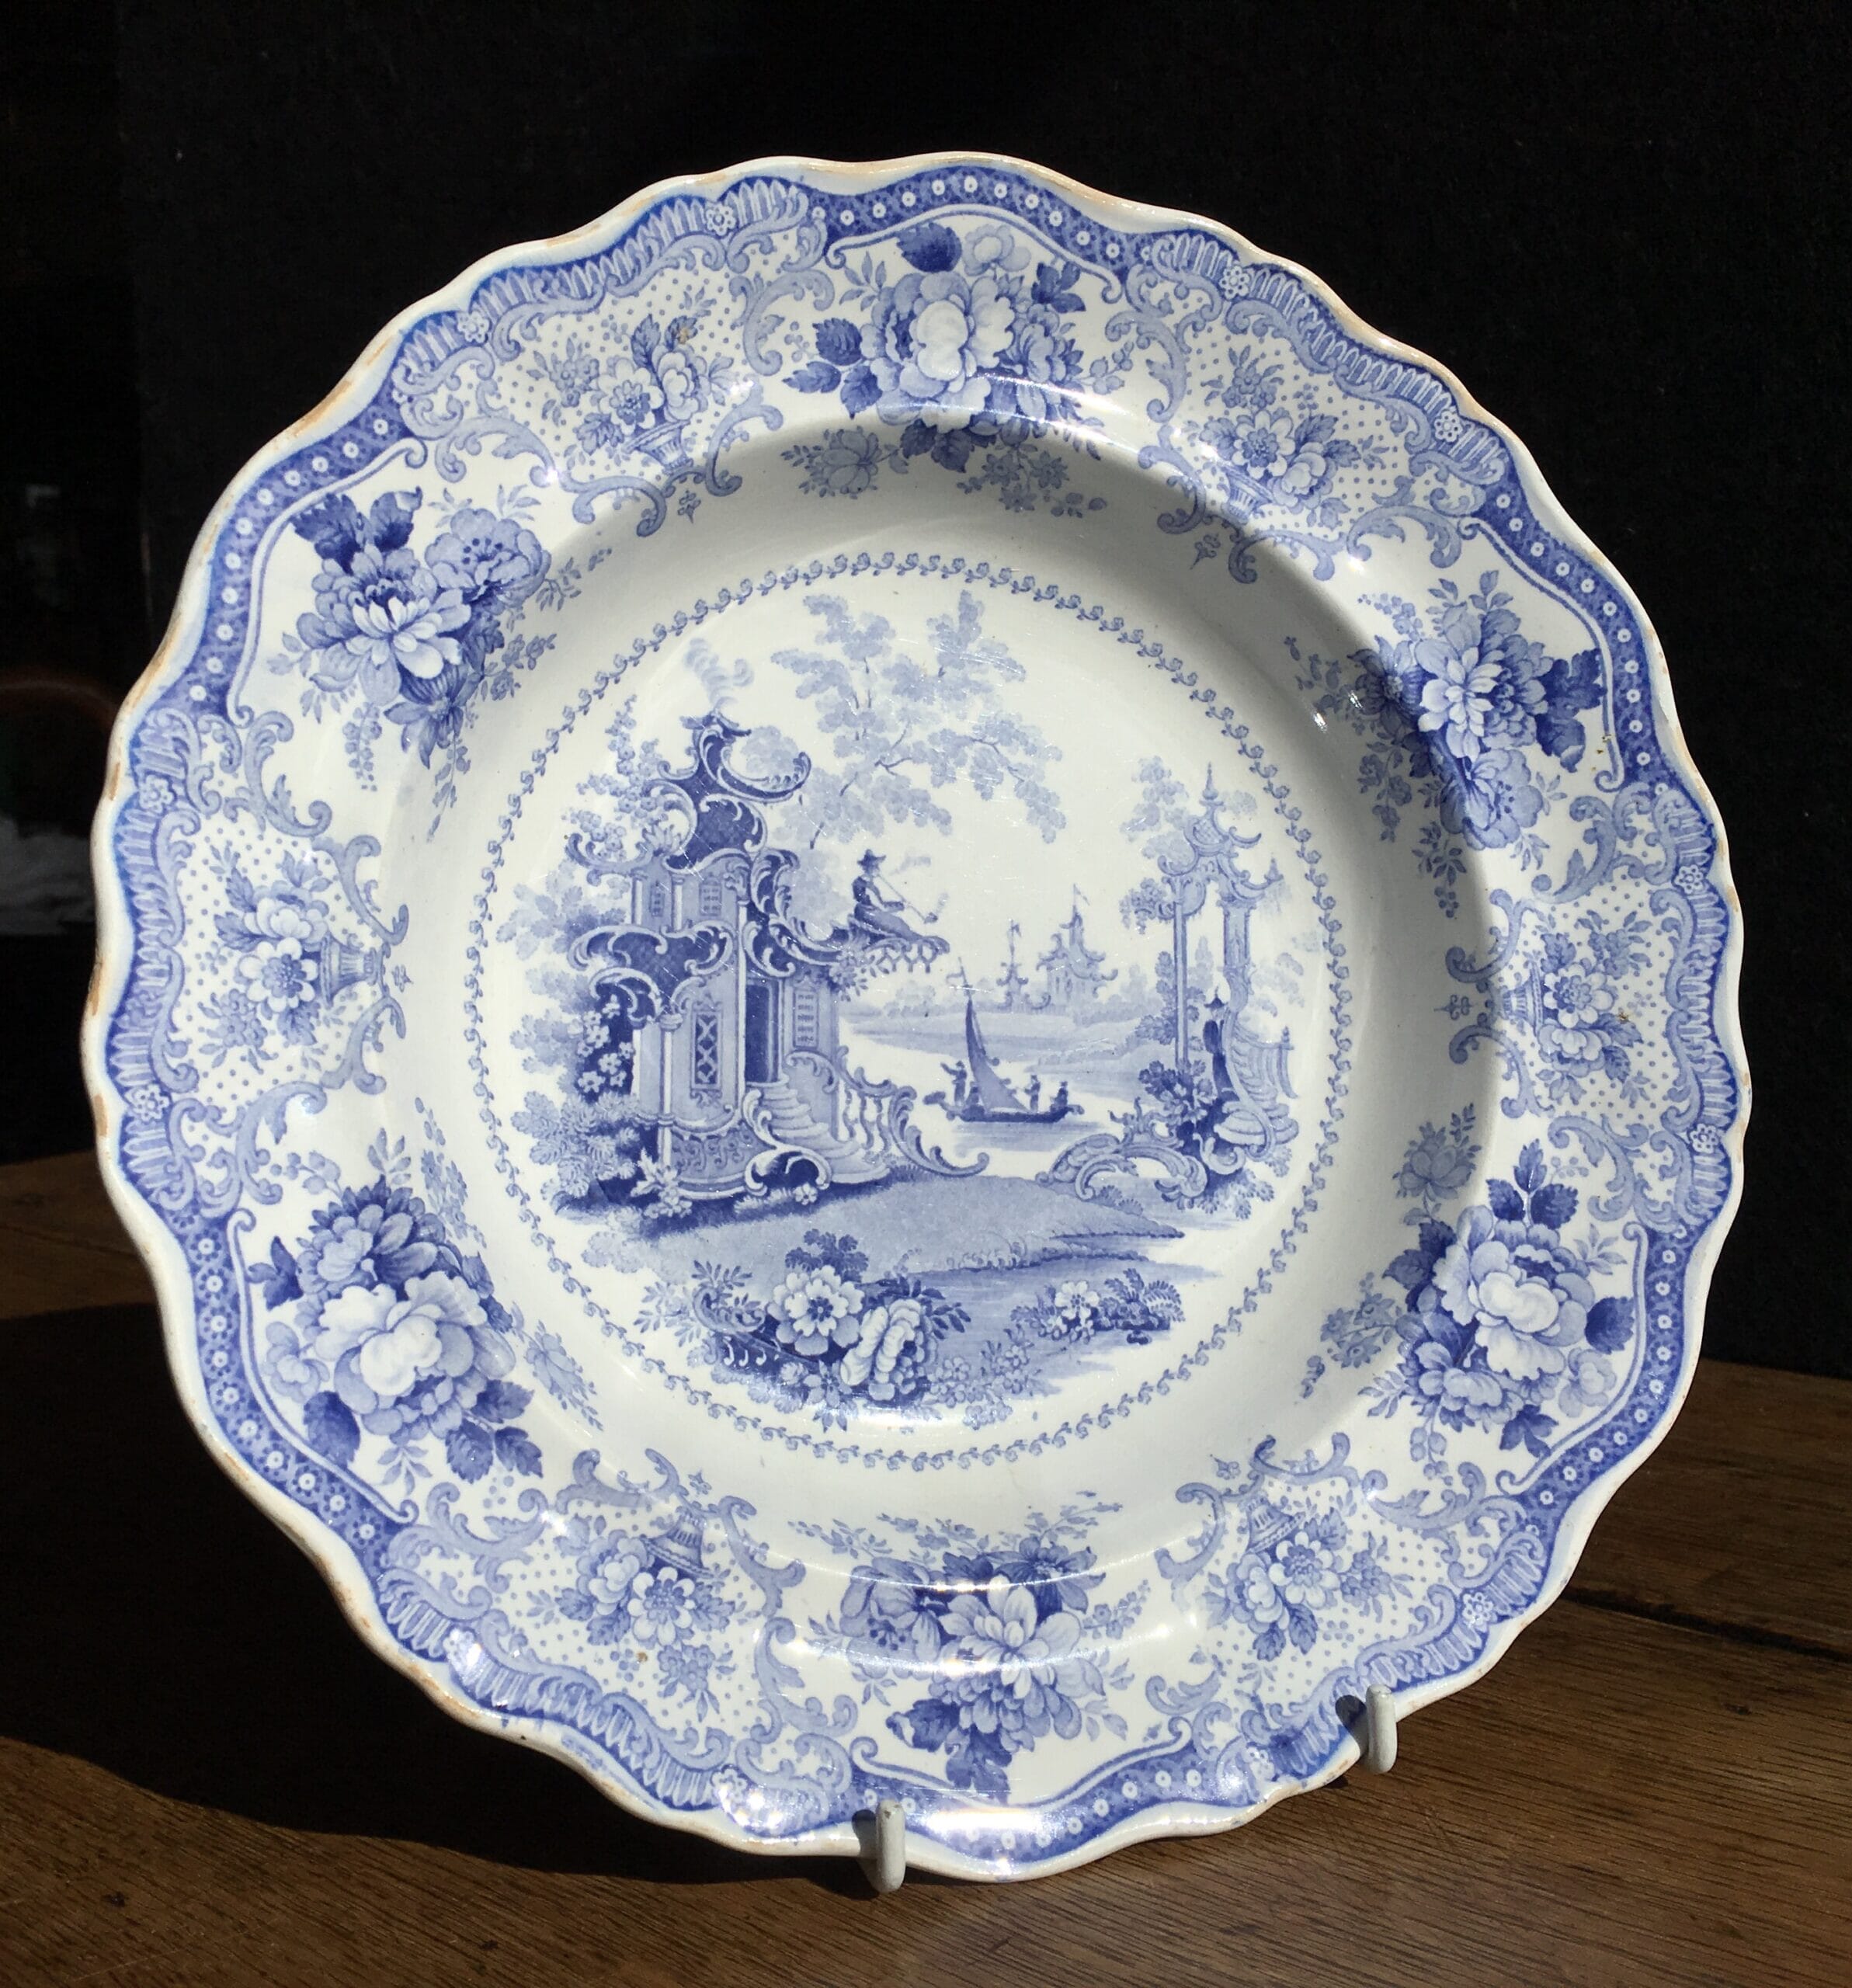 Pottery soup plate, Meir and Son " Fairy Villas " pattern, c.1837.-0